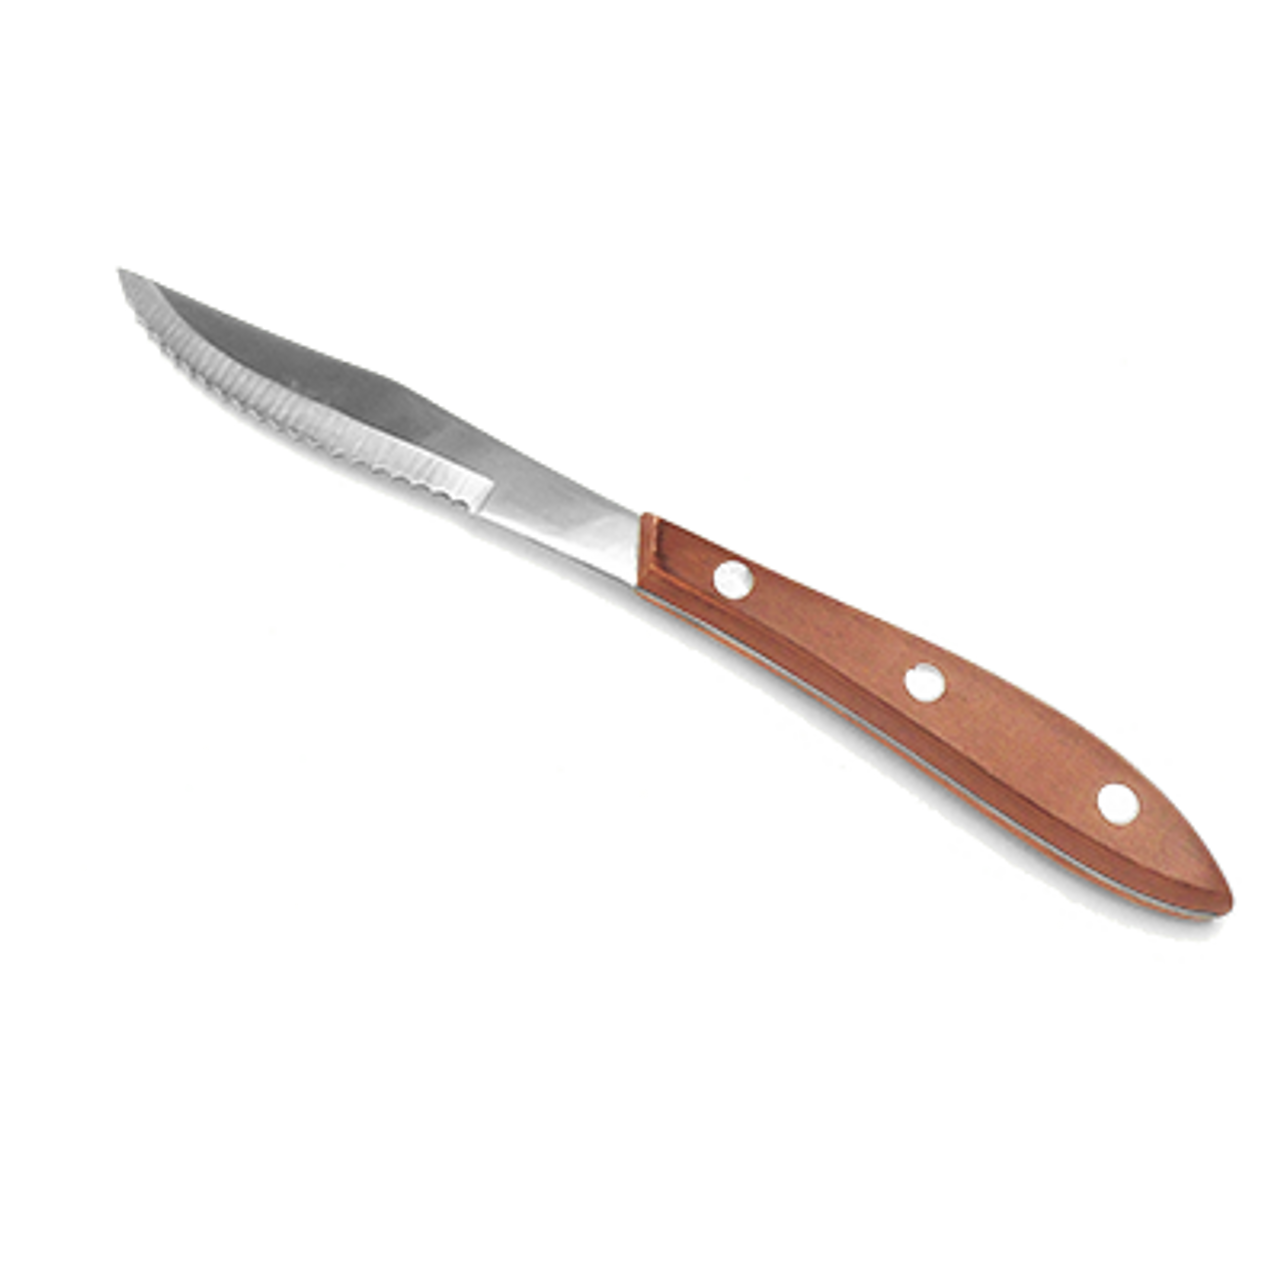 https://cdn11.bigcommerce.com/s-g3i86bef61/images/stencil/1280x1280/products/289/1832/Walco-850527-Steak-Knife__80923.1682531659.png?c=1